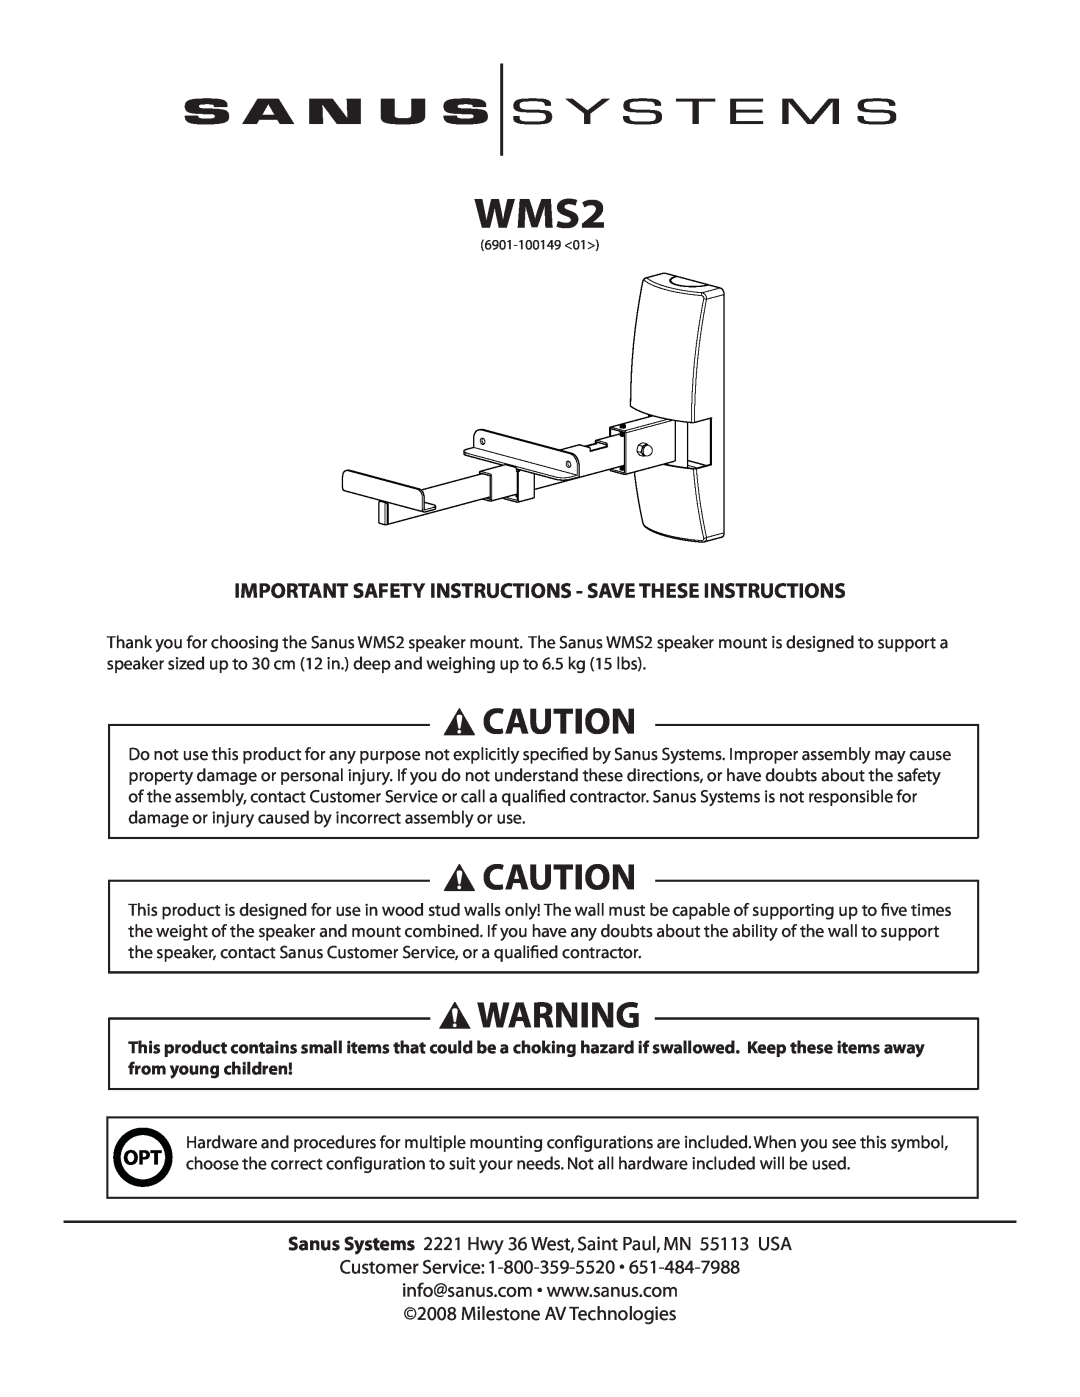 Sanus Systems WMS2 important safety instructions 